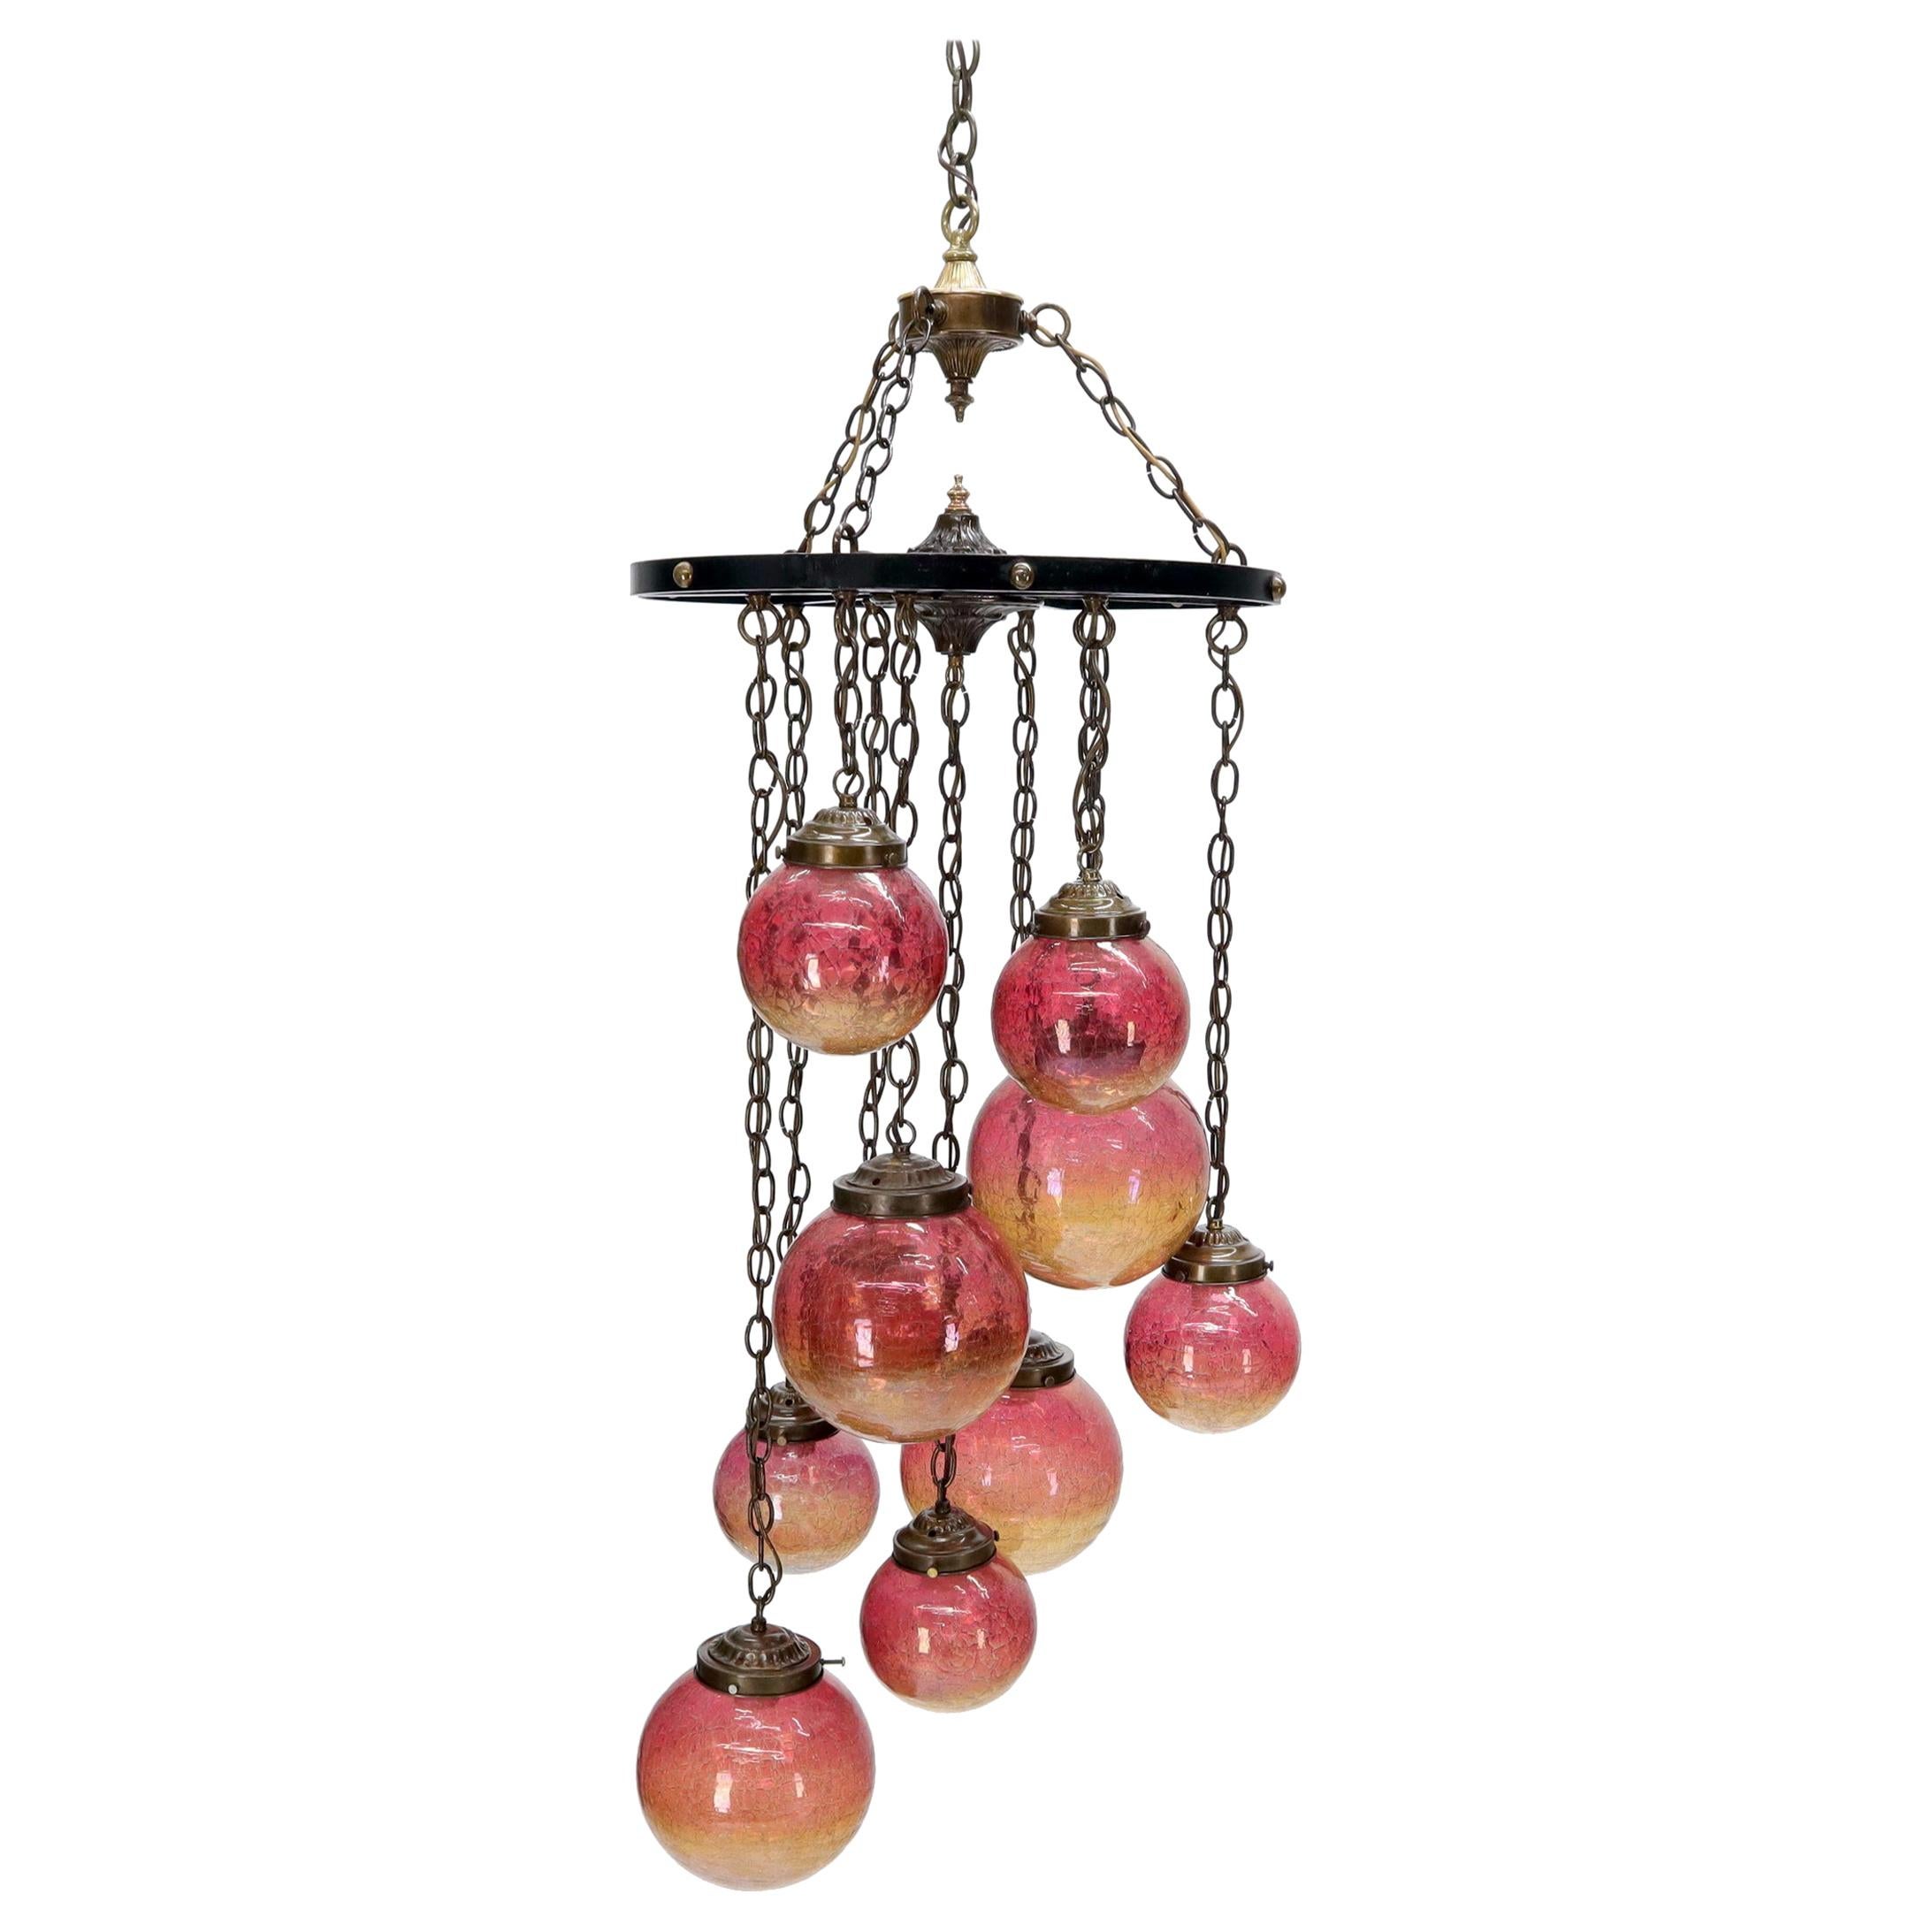 Ruby & Amber Globes on Chain Chandelier Light Fixture For Sale